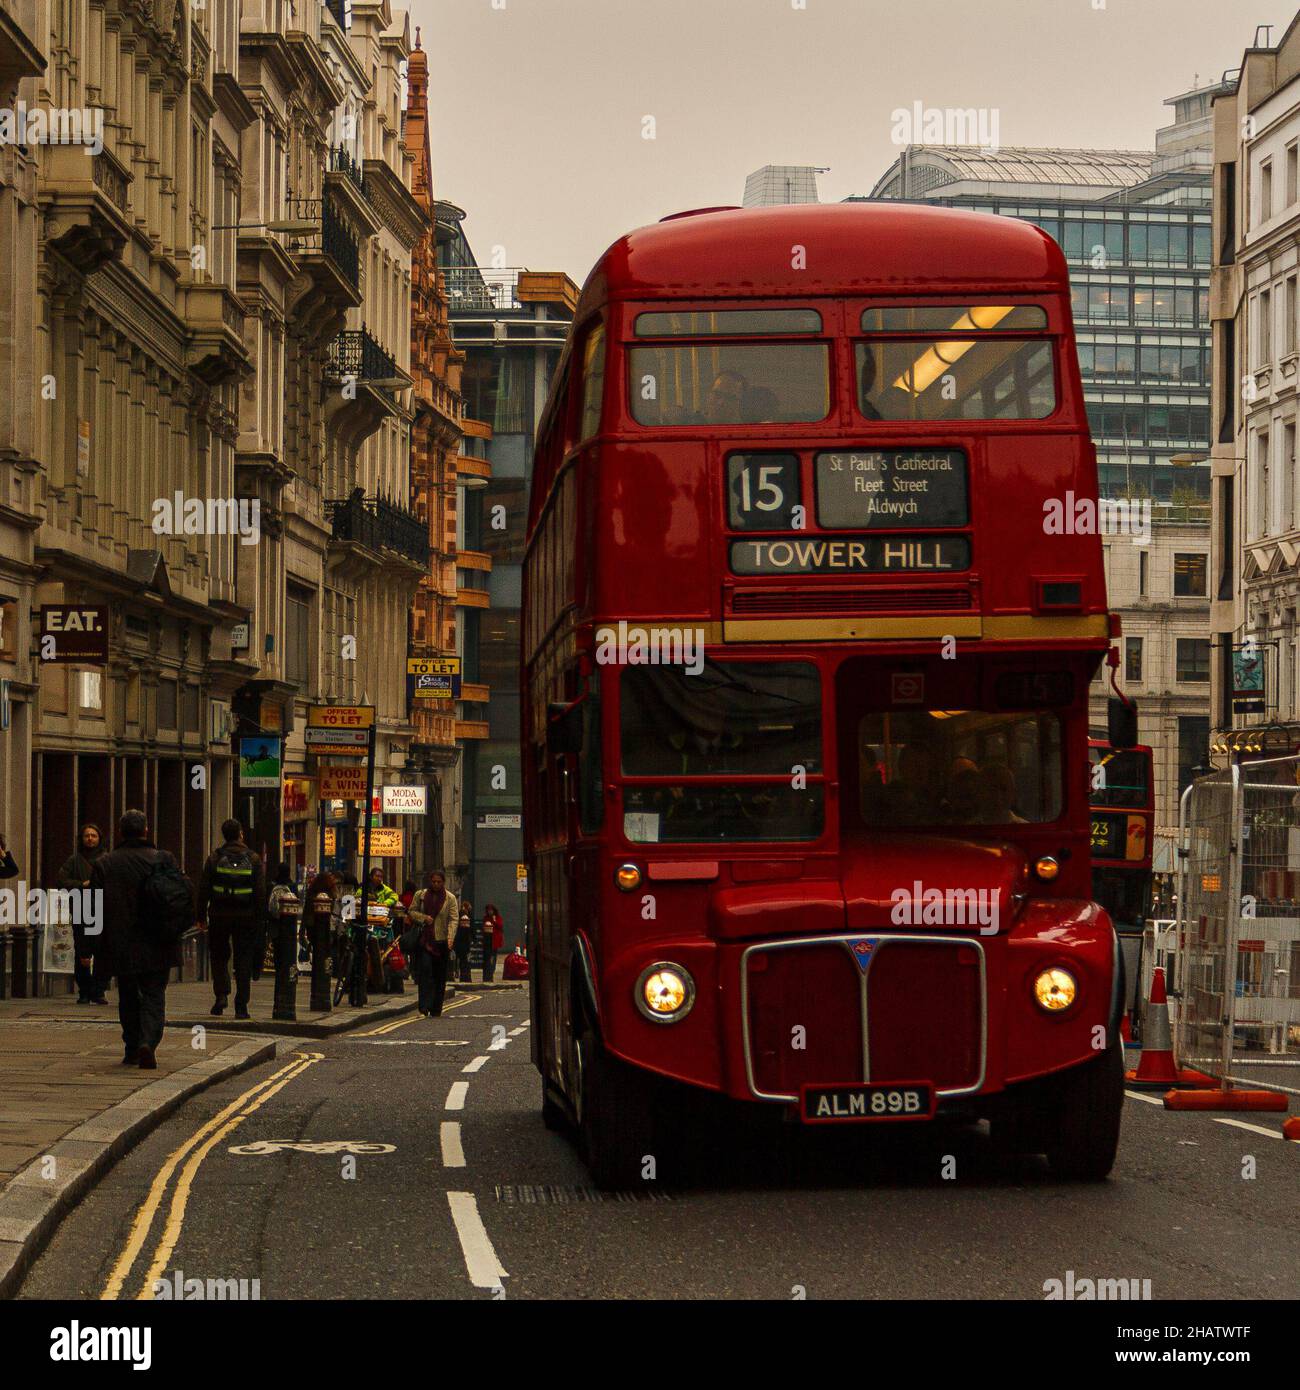 London, United Kingdom; March 16th 2011: Typical city bus on a London street. Stock Photo